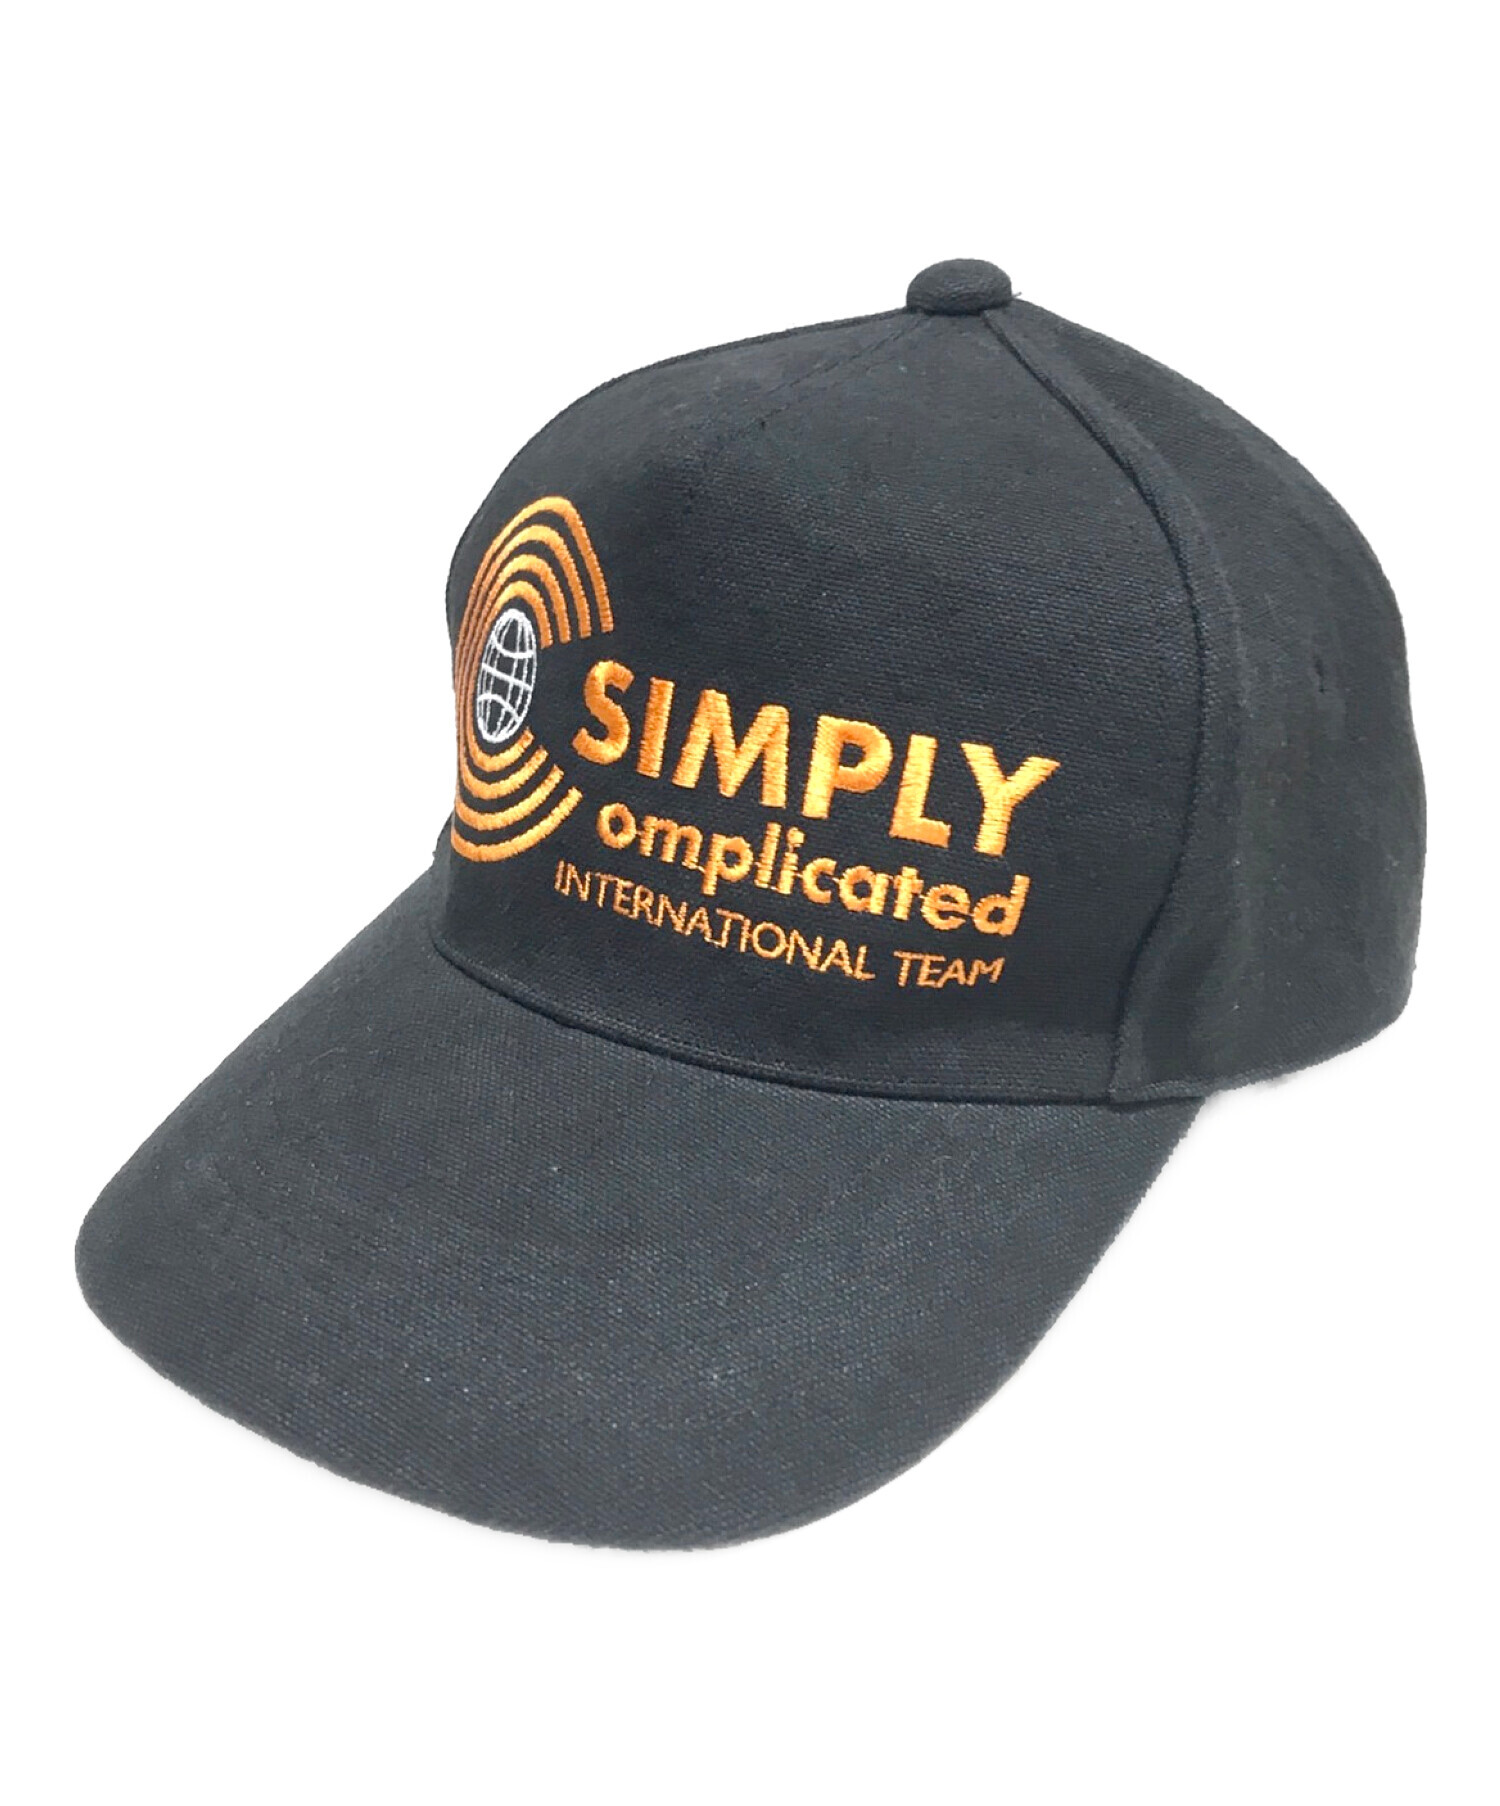 simply complicated キャップ-